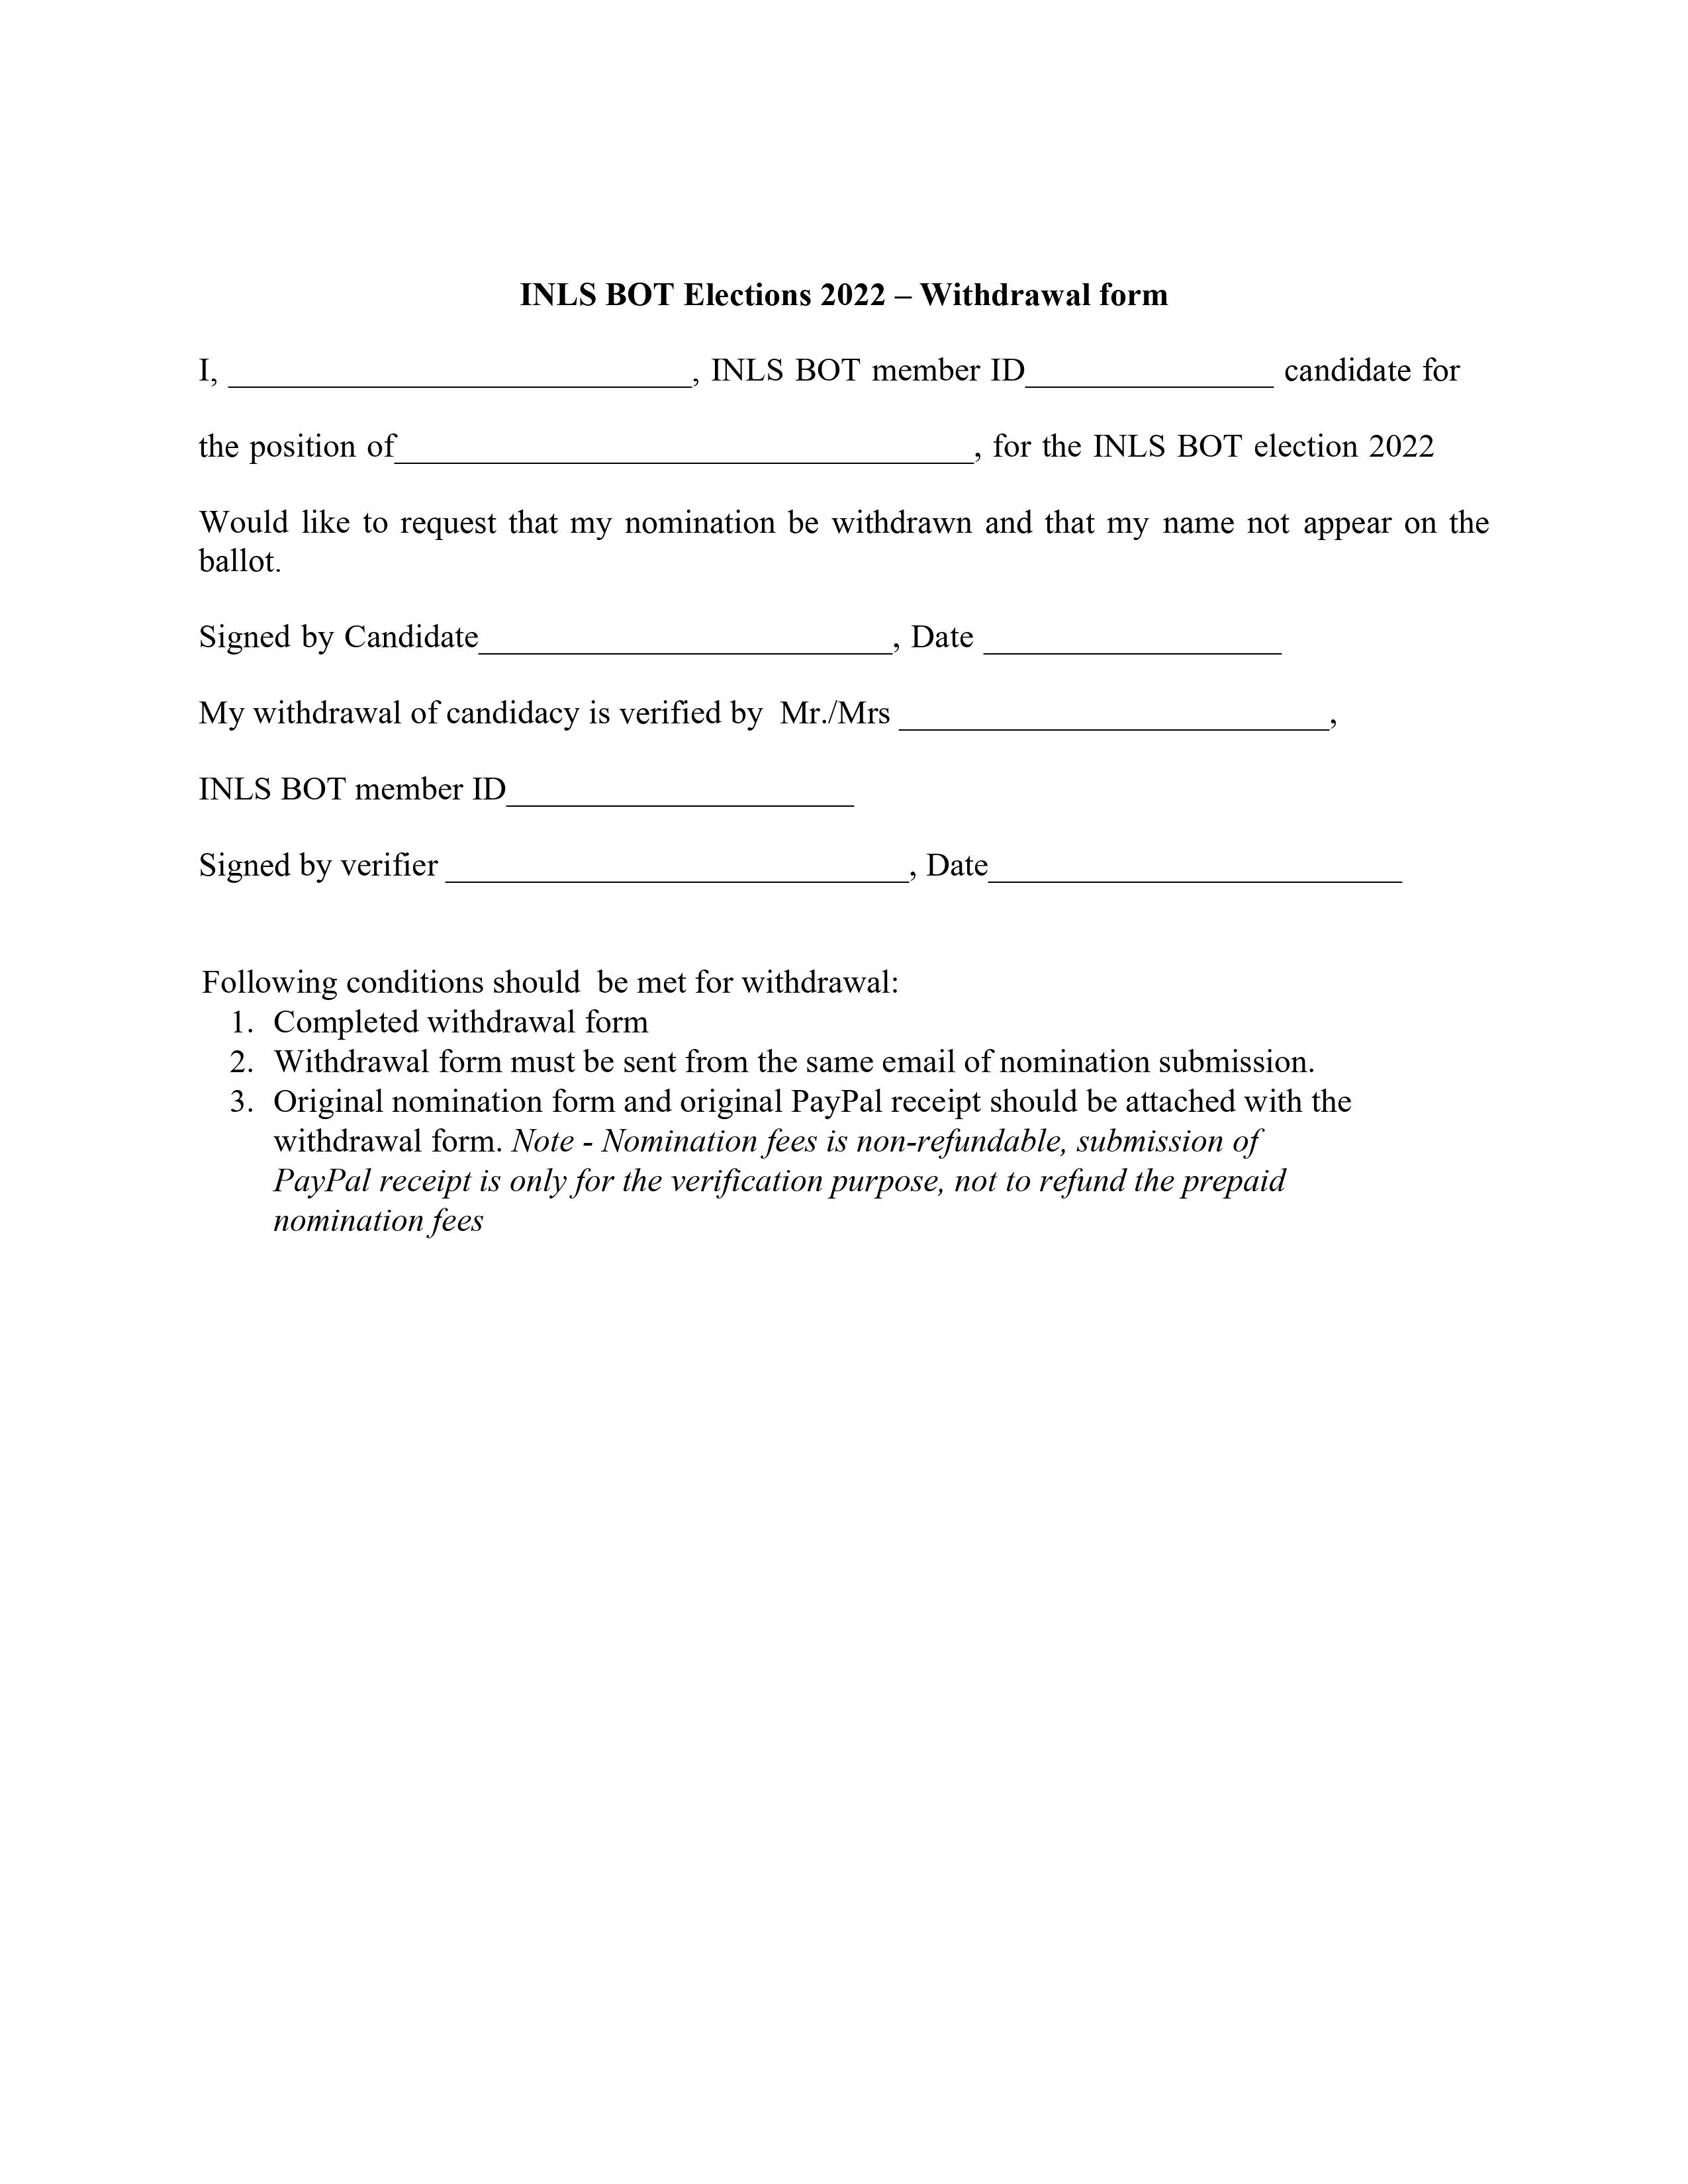 INLS BOT 2022 Candidate Withdrawal Form